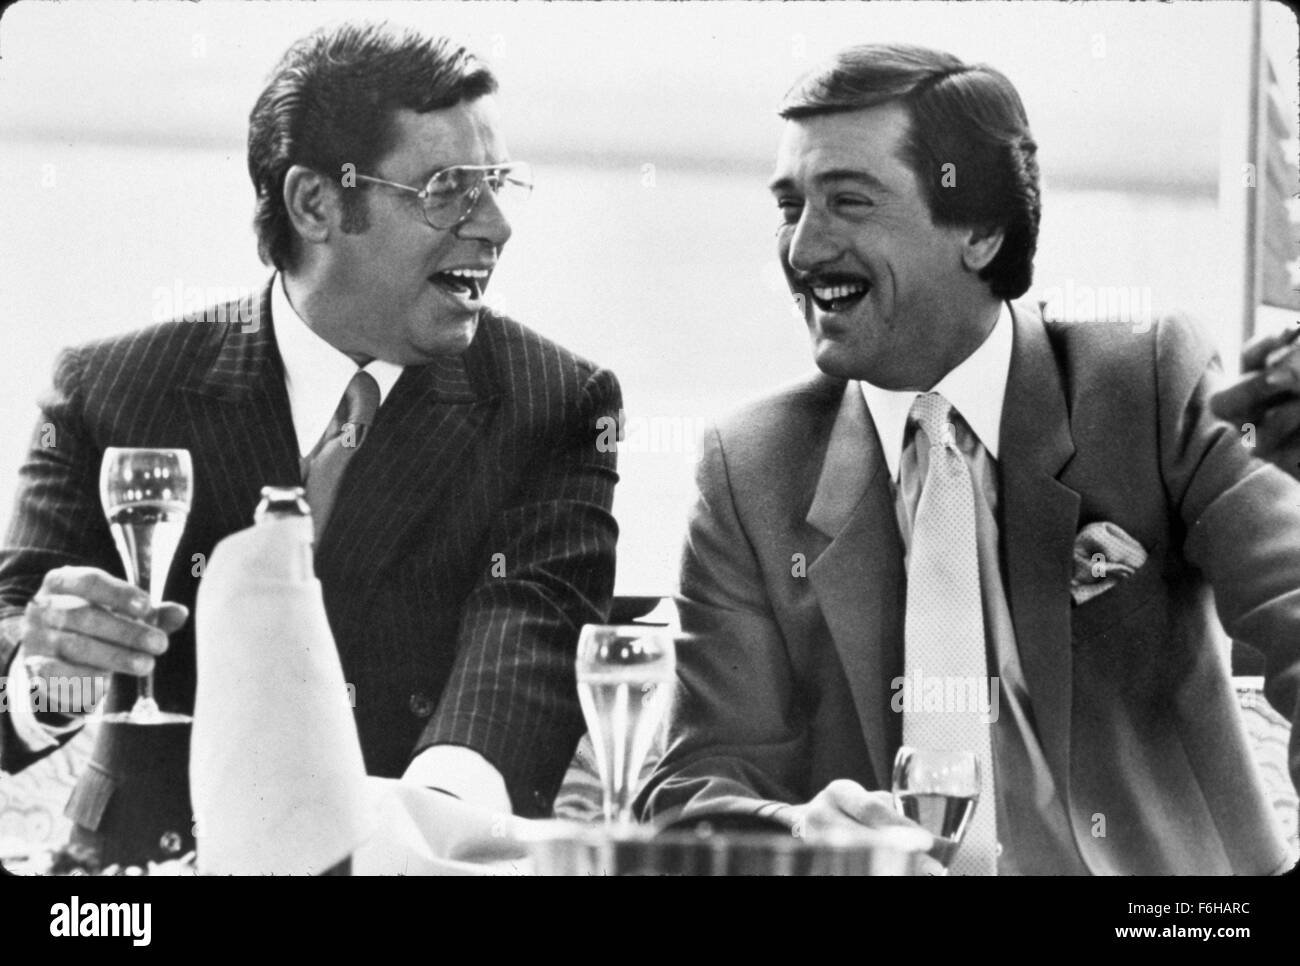 RELEASE DATE: February 18, 1983  MOVIE TITLE: The King of Comedy  DIRECTOR: Martin Scorsese  STUDIO: 20th Century Fox  PLOT: Aspiring comic Rupert Pupkin wants to achieve success in showbiz, by resorting to stalking his idol, a late night talk show host who craves his own privacy  PICTURED: ROBERT DE NIRO as Rupert Pupkin and JERRY LEWIS as Jerry Langford  (Credit Image: c 20th Century Fox/Entertainment Pictures) Stock Photo